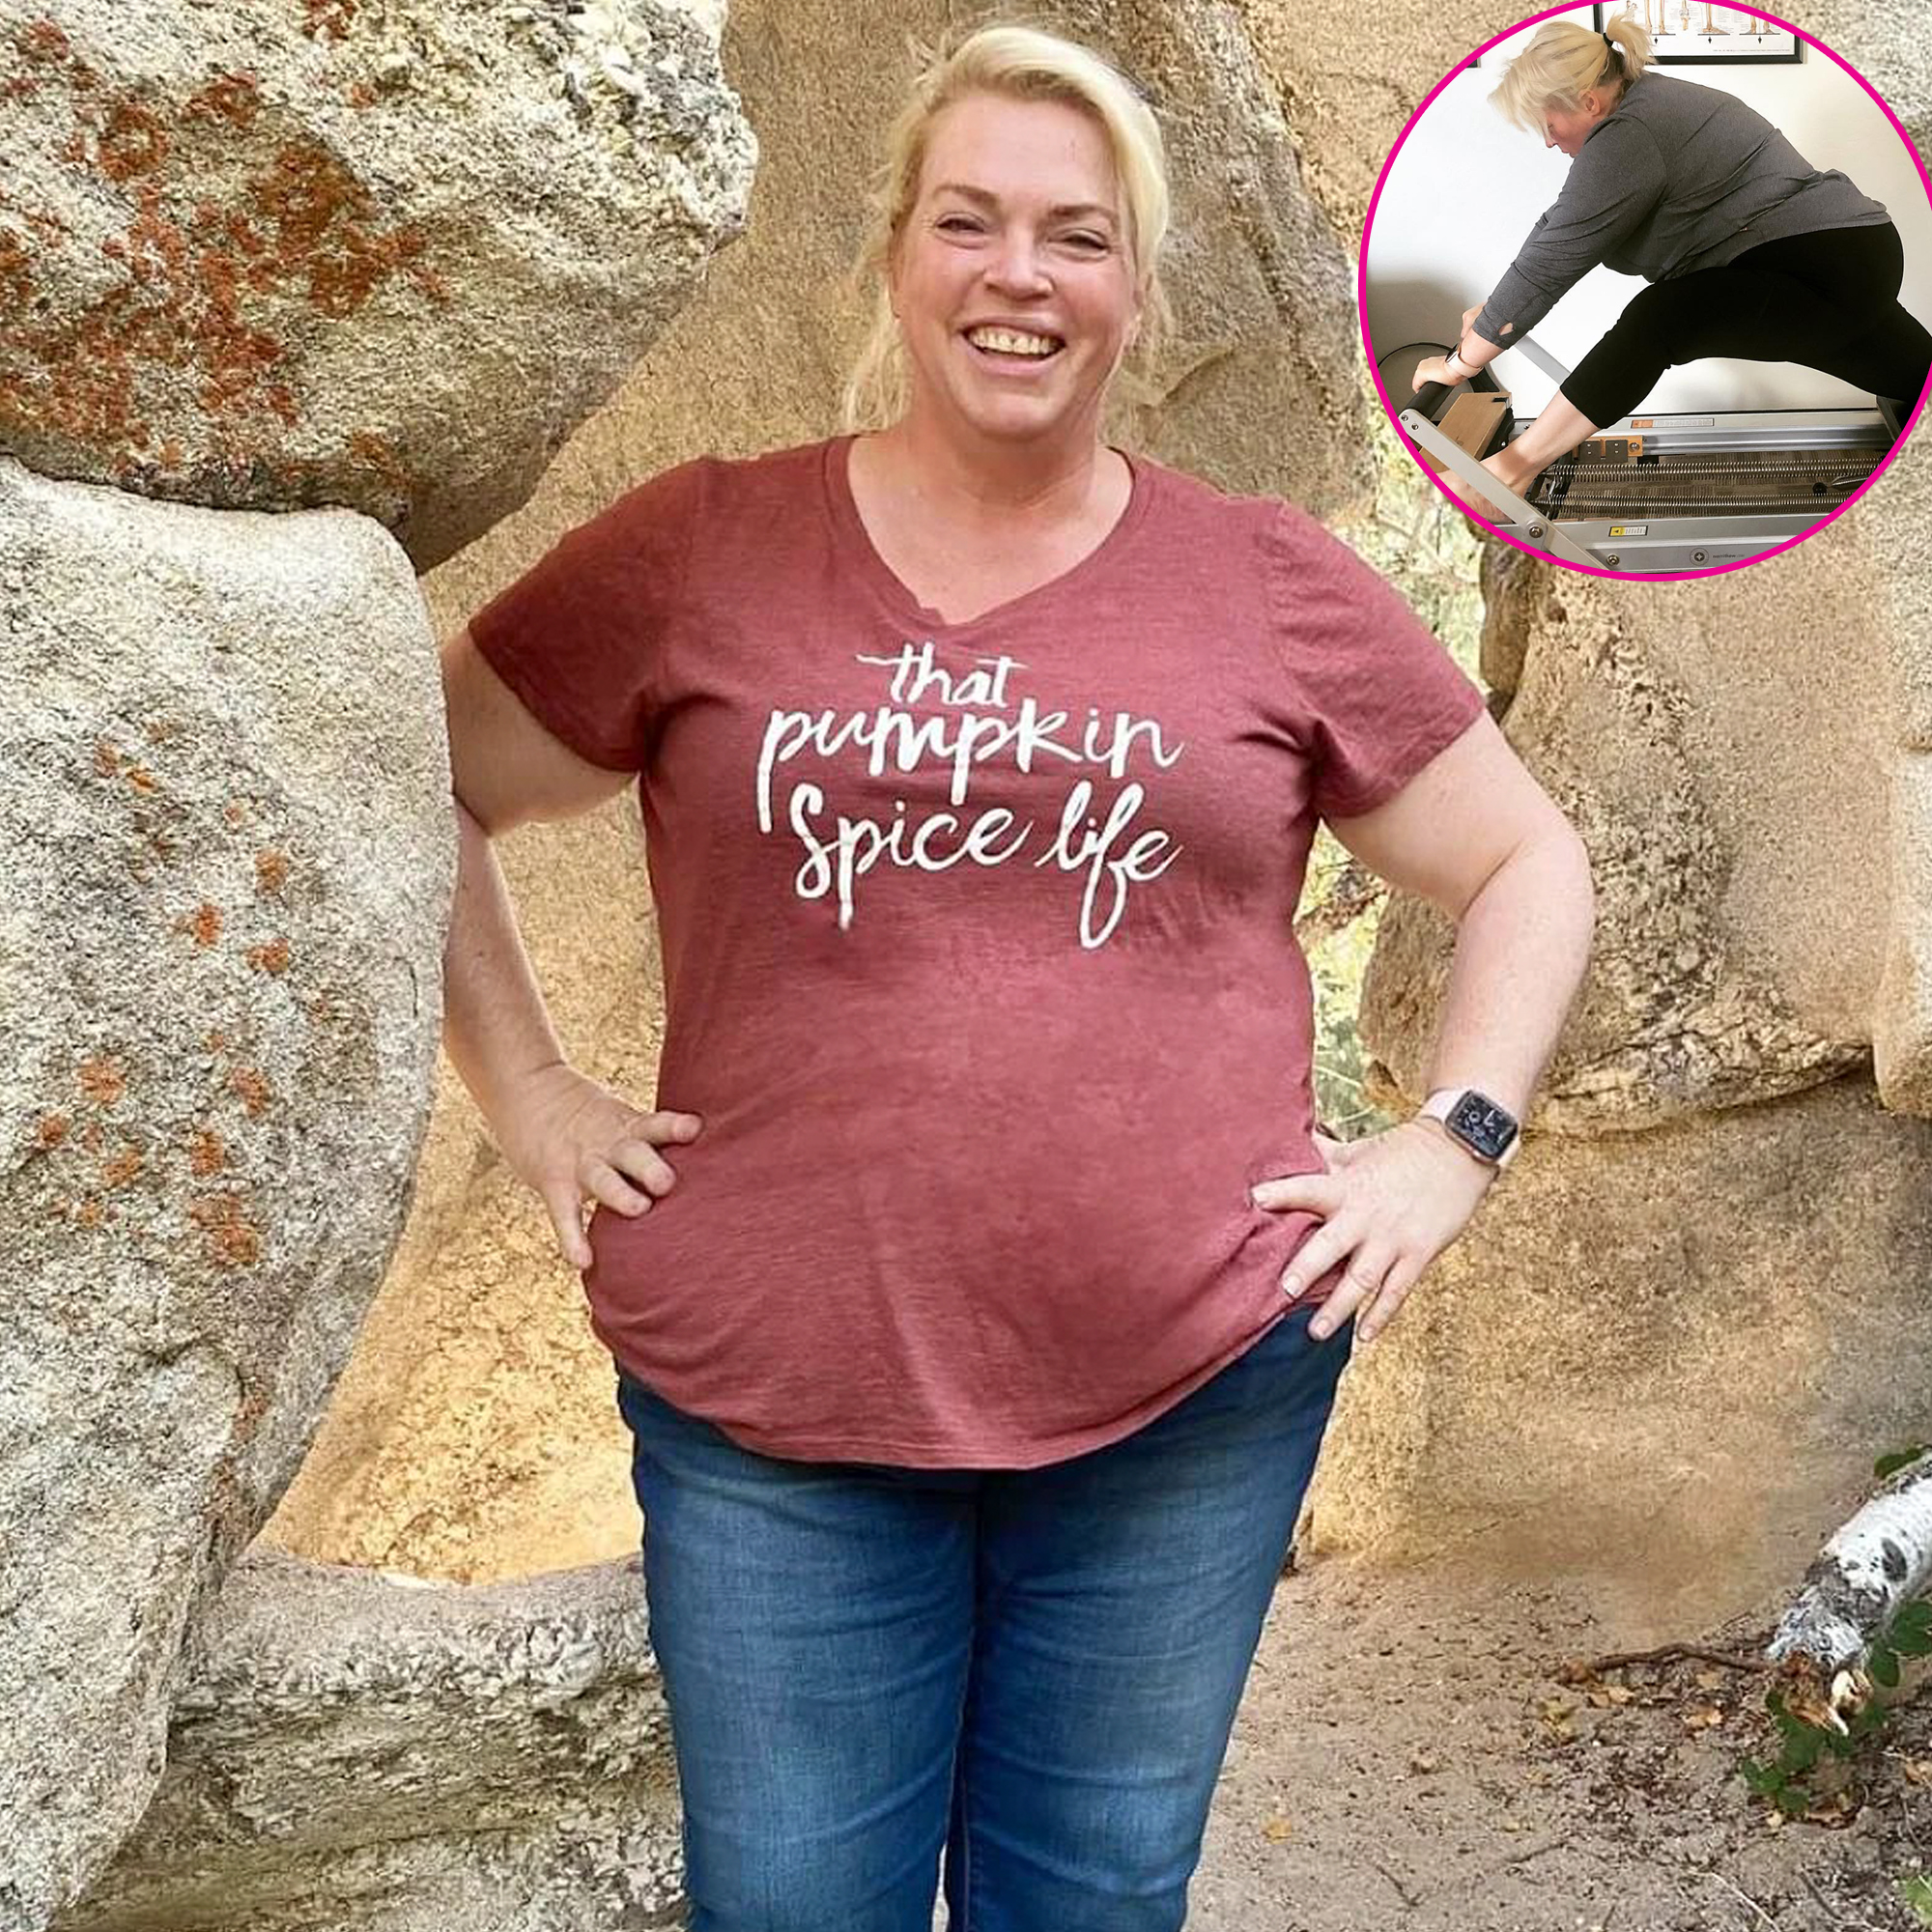 Sister Wives' Janelle Shares Pilates Photo Amid Health Journey